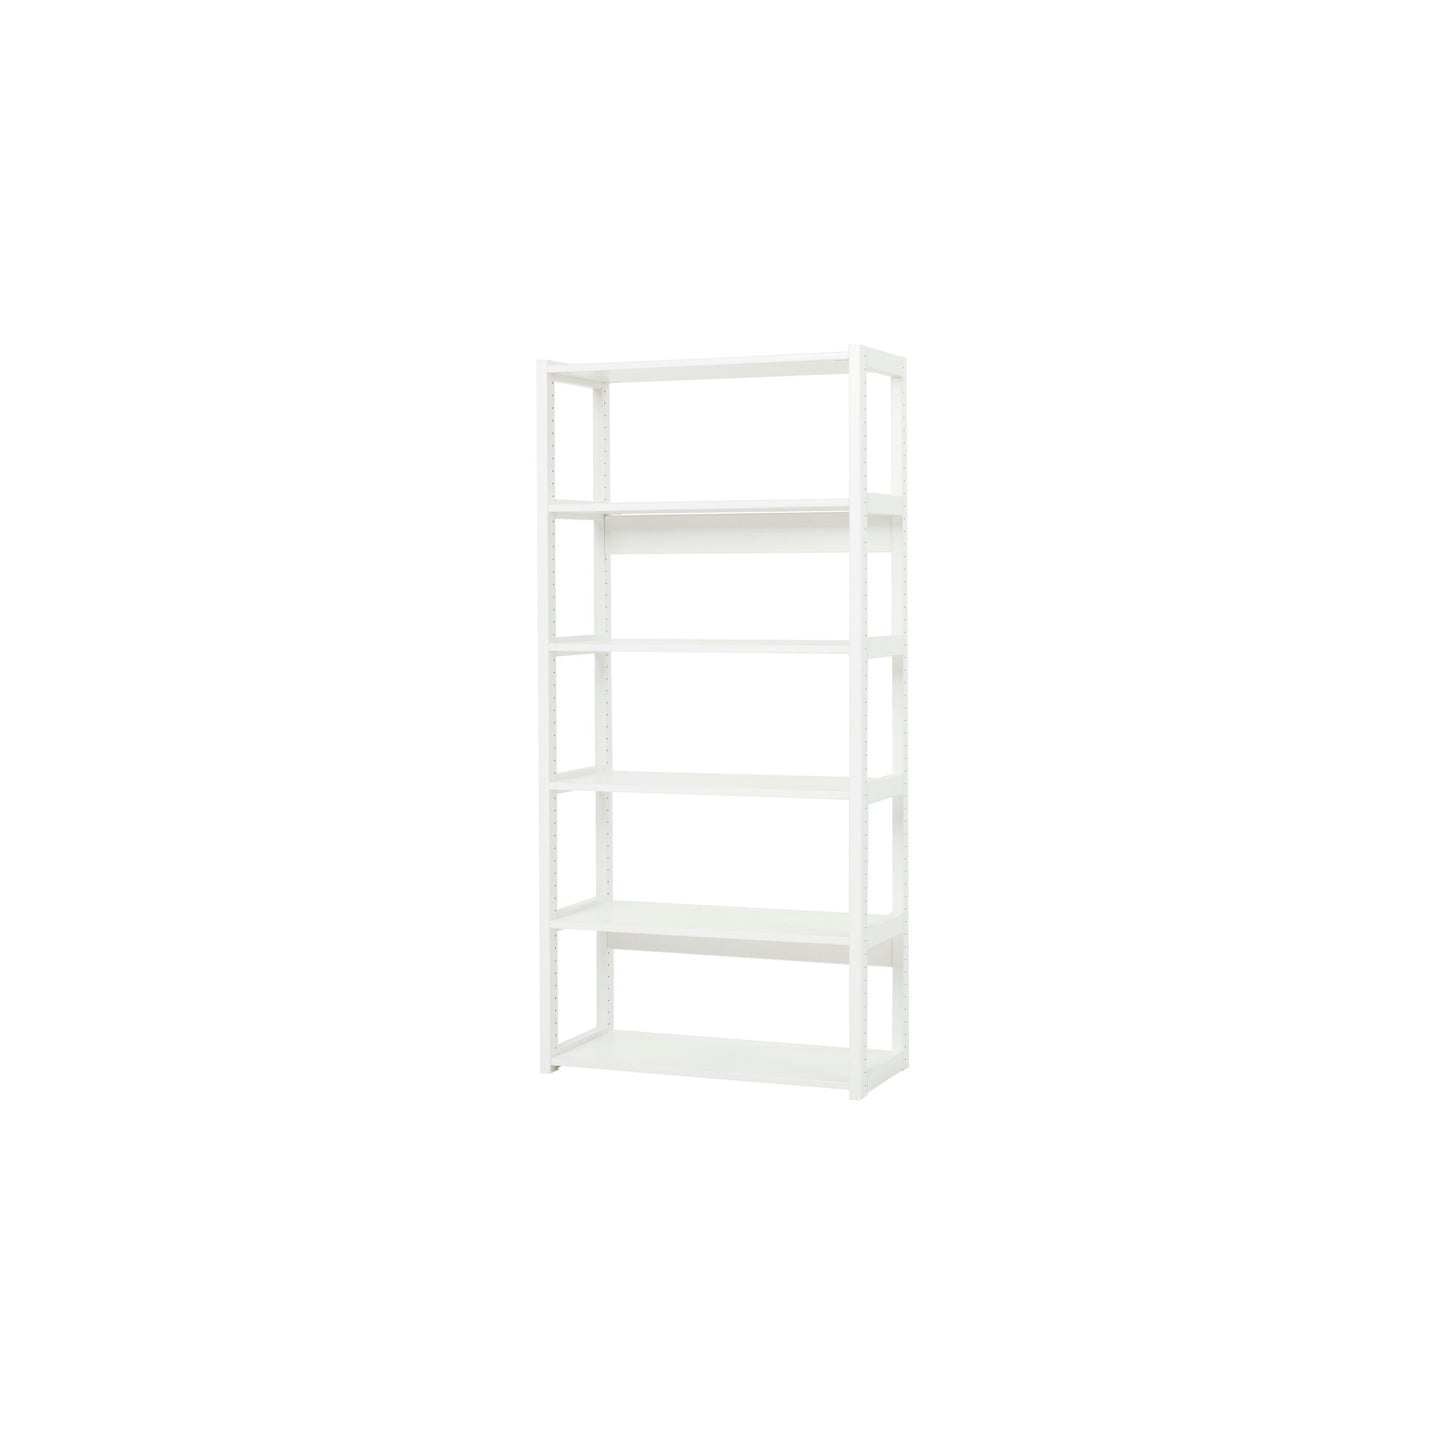 Hoppekids STOREY section with 6 shelves